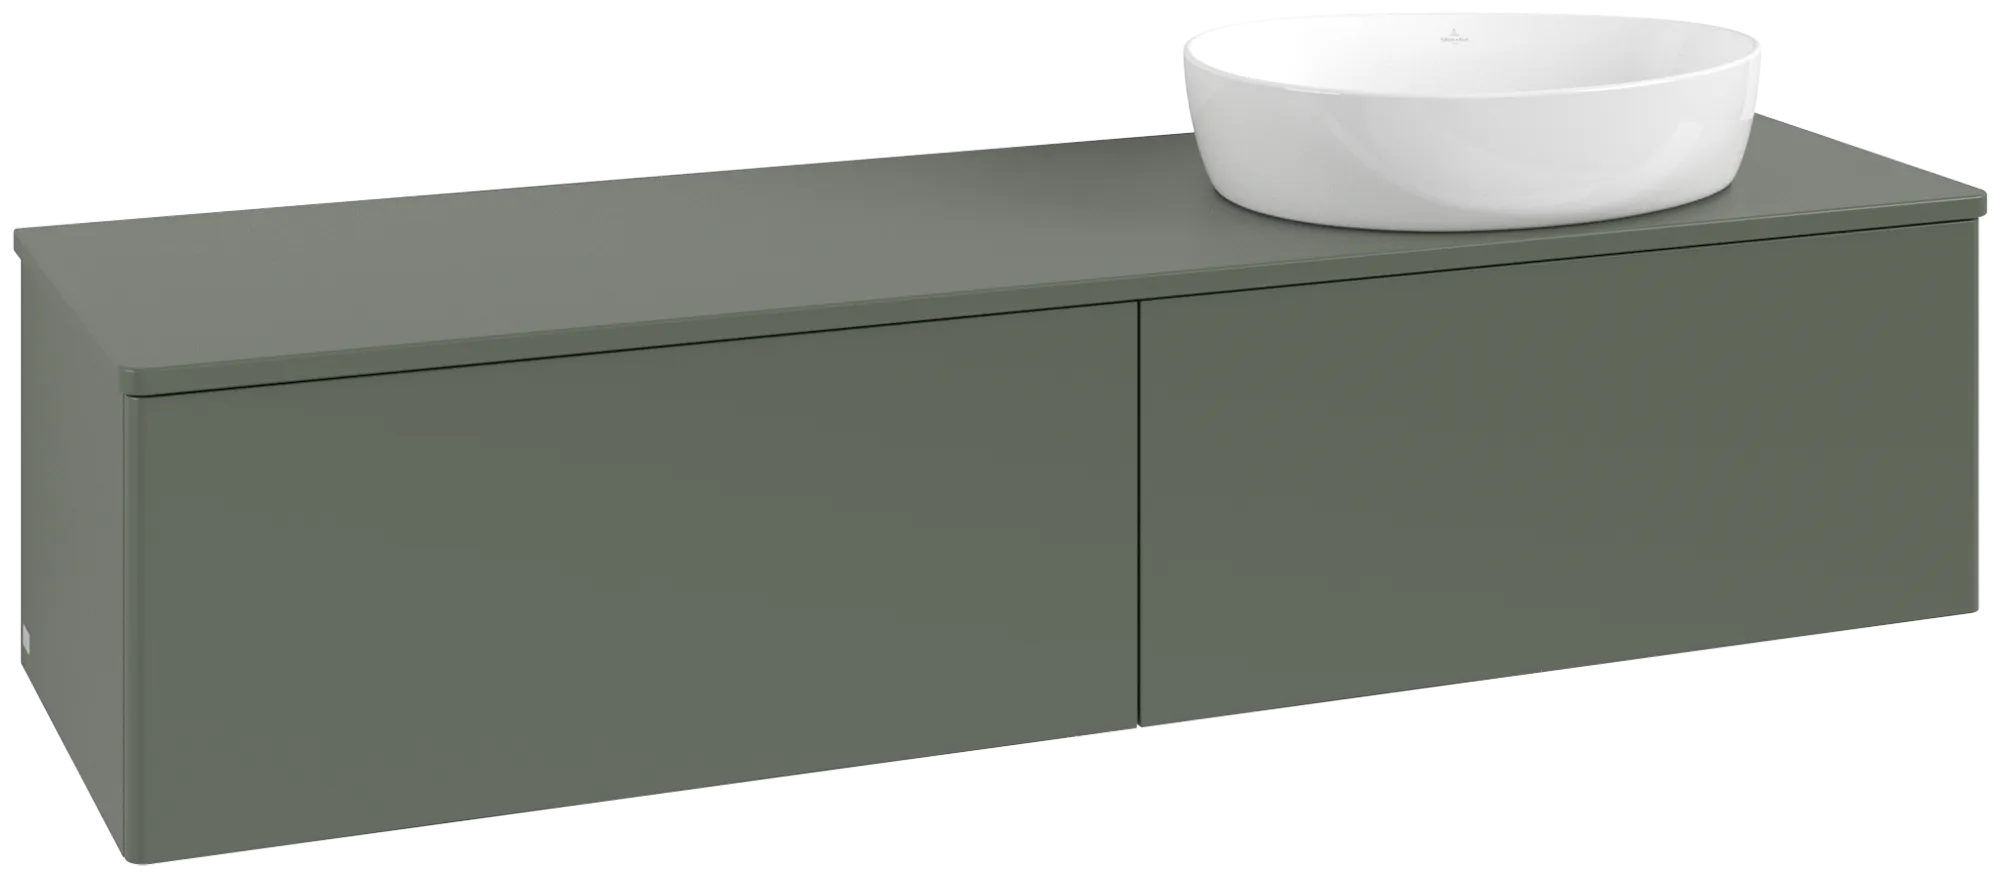 Picture of VILLEROY BOCH Antao Vanity unit, 2 pull-out compartments, 1600 x 360 x 500 mm, Front without structure, Leaf Green Matt Lacquer / Leaf Green Matt Lacquer #K38050HL